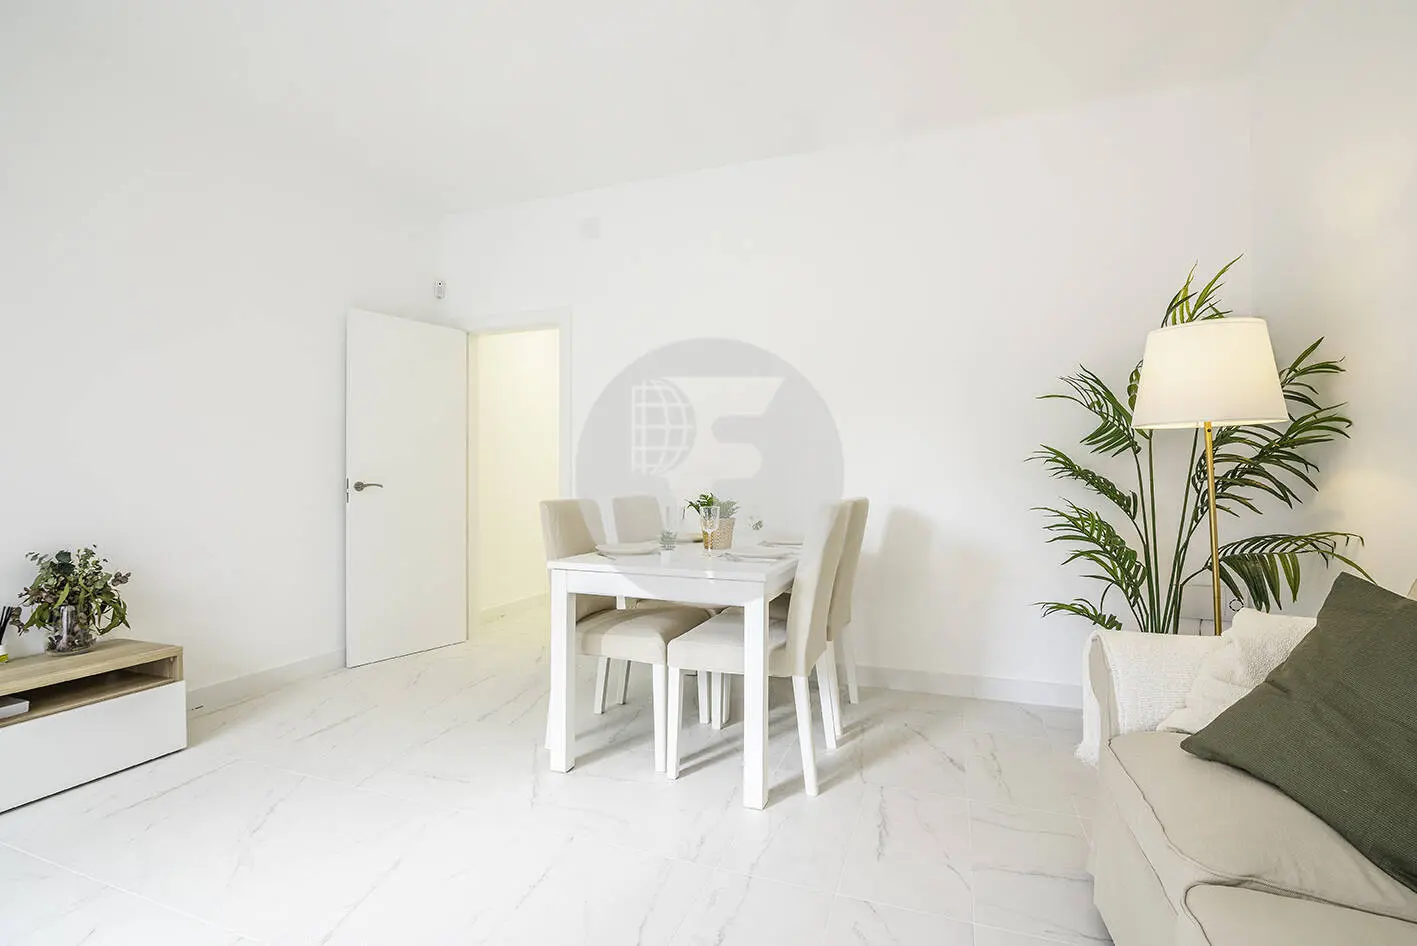 Brand new completely renovated apartment on Aragó street in the heart of El Clot in Barcelona. 5